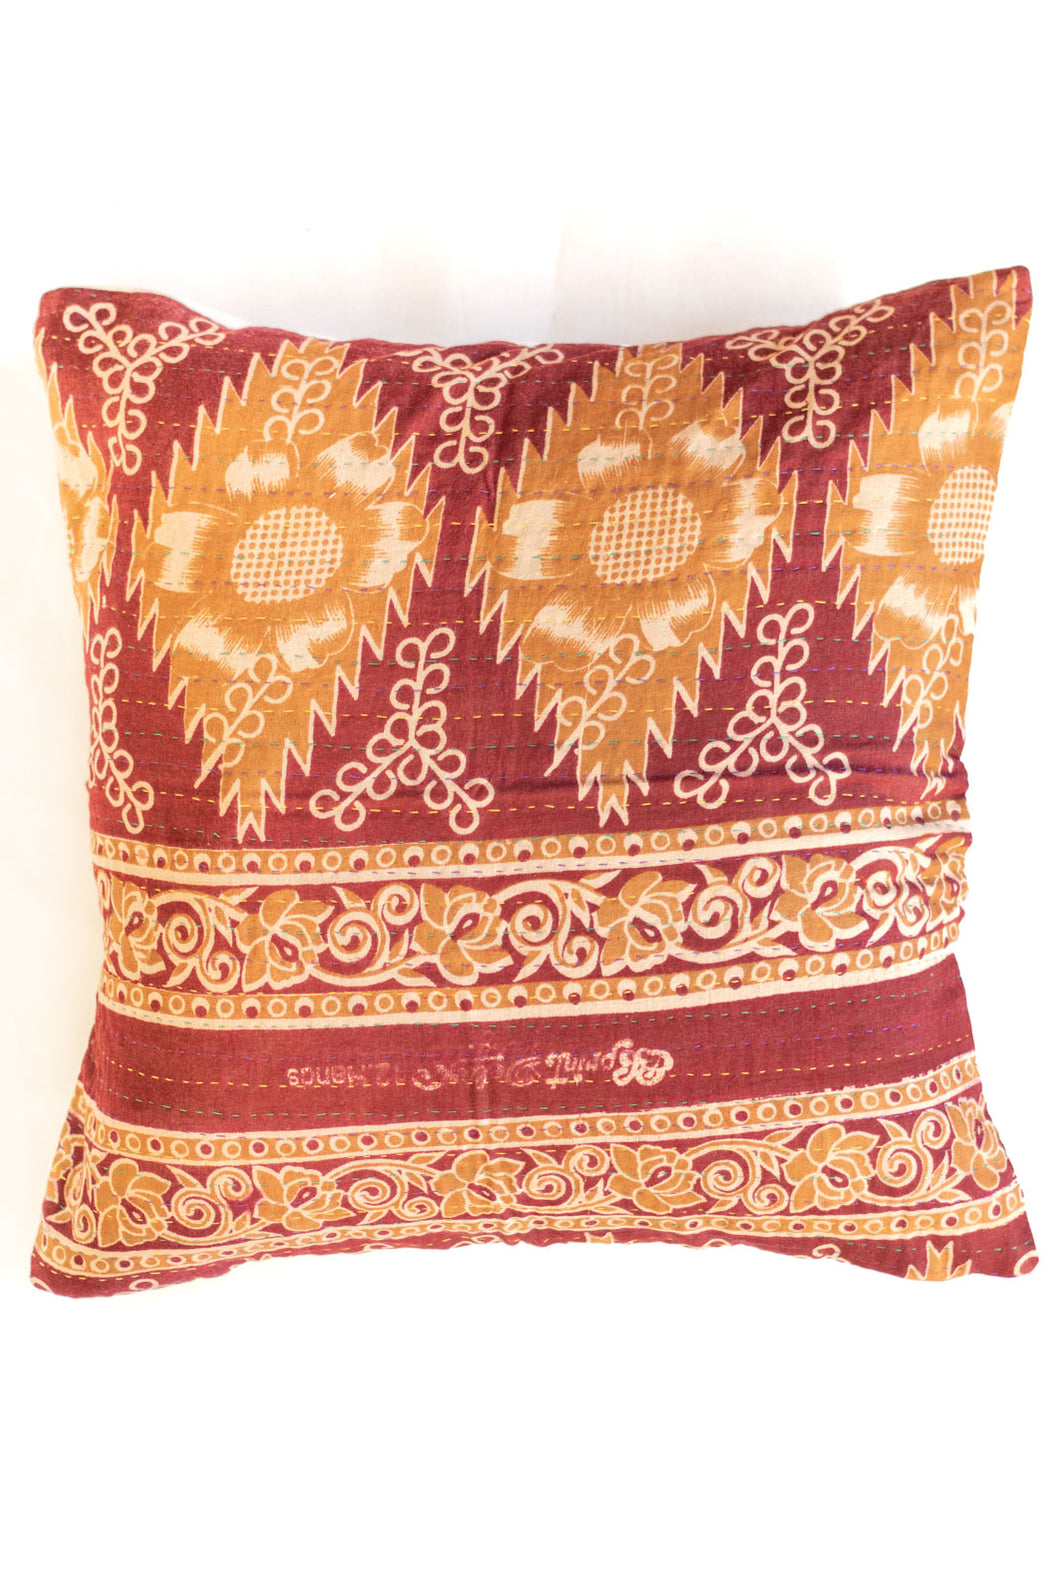 Kantha Pillow Covers 18